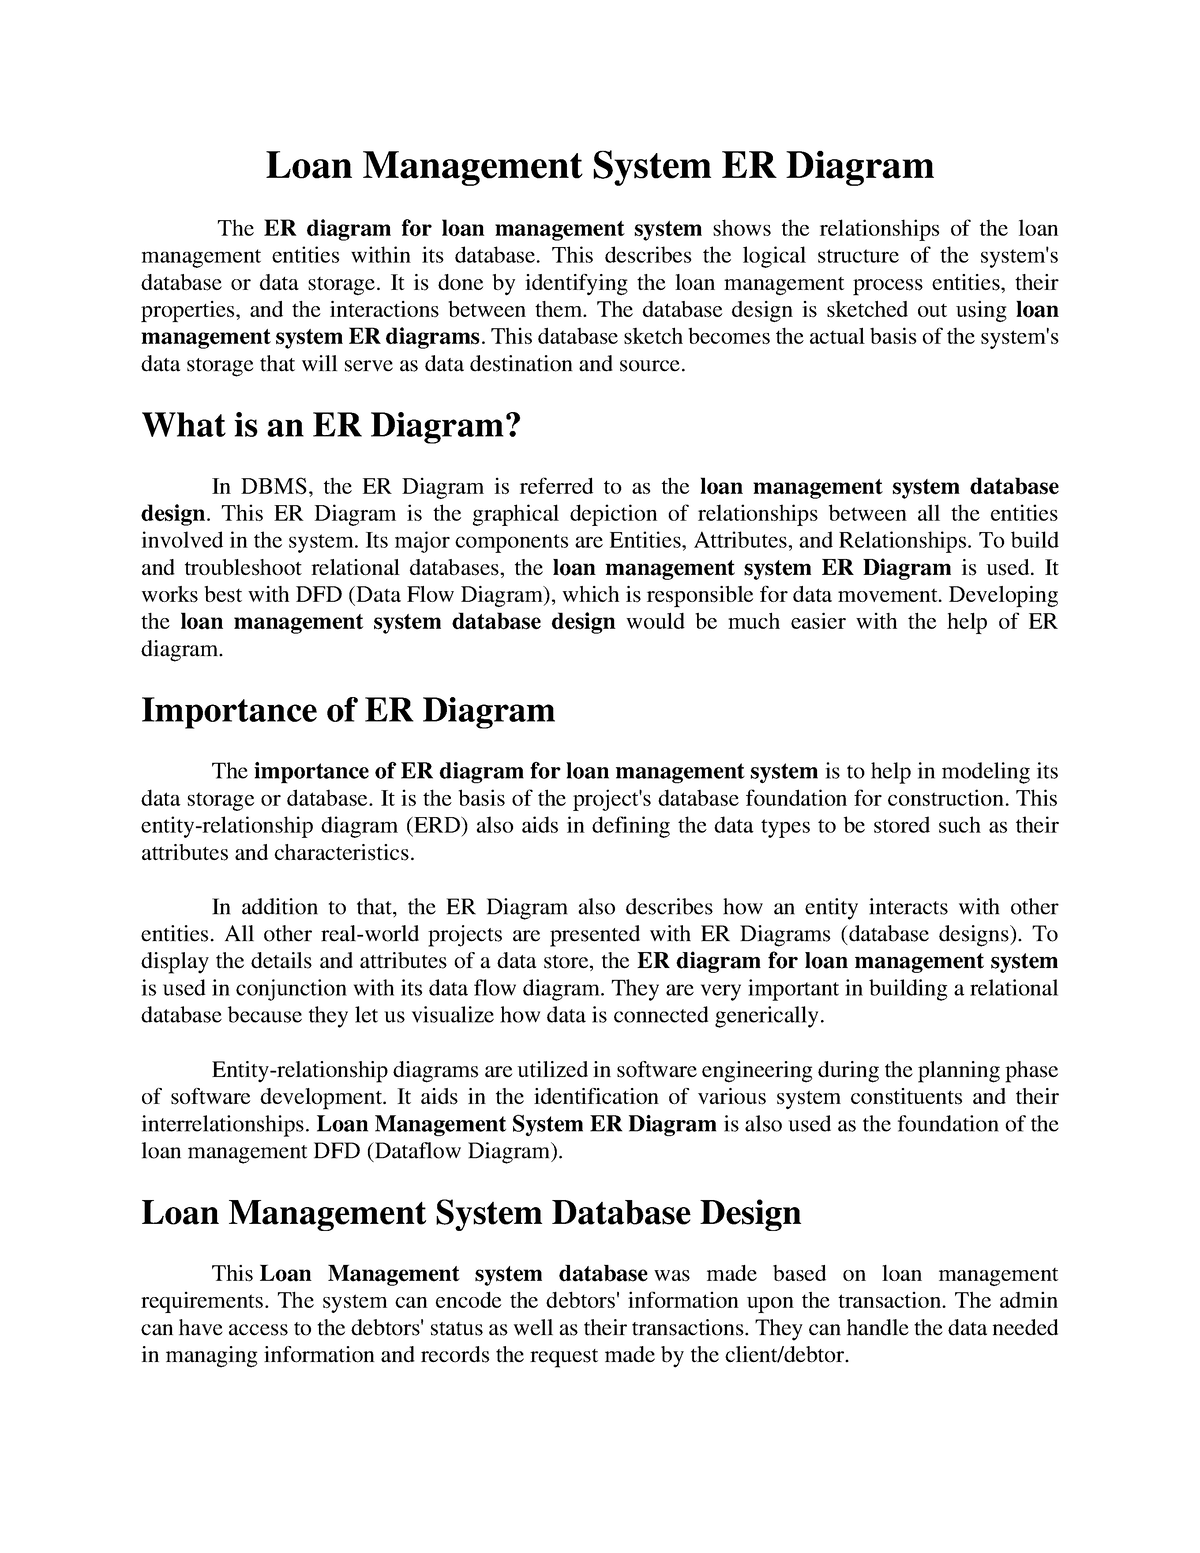 loan management system thesis pdf